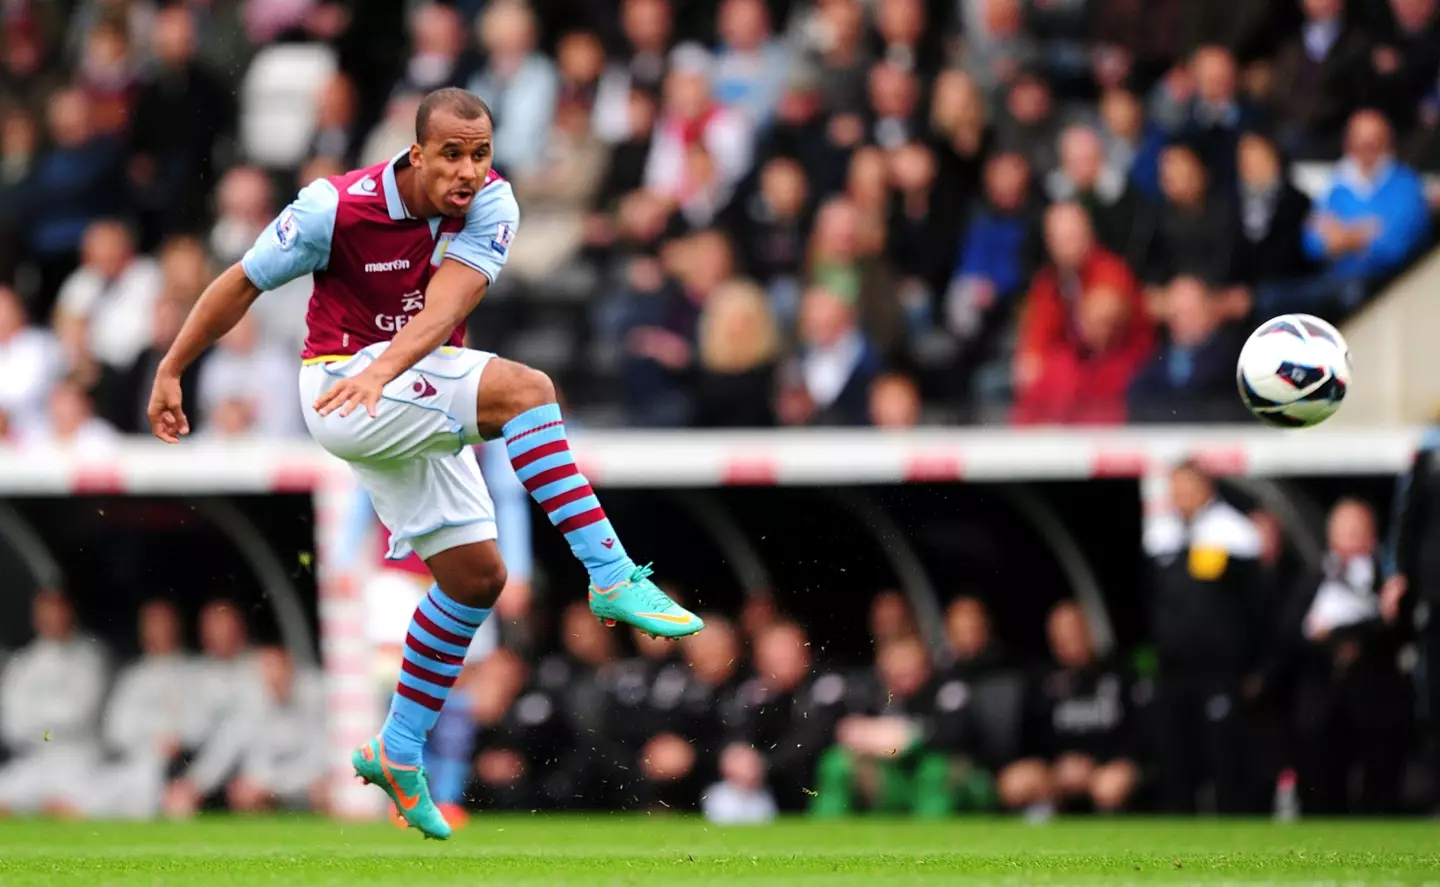 Gabriel Agbonlahor spent his entire club playing career with Aston Villa.